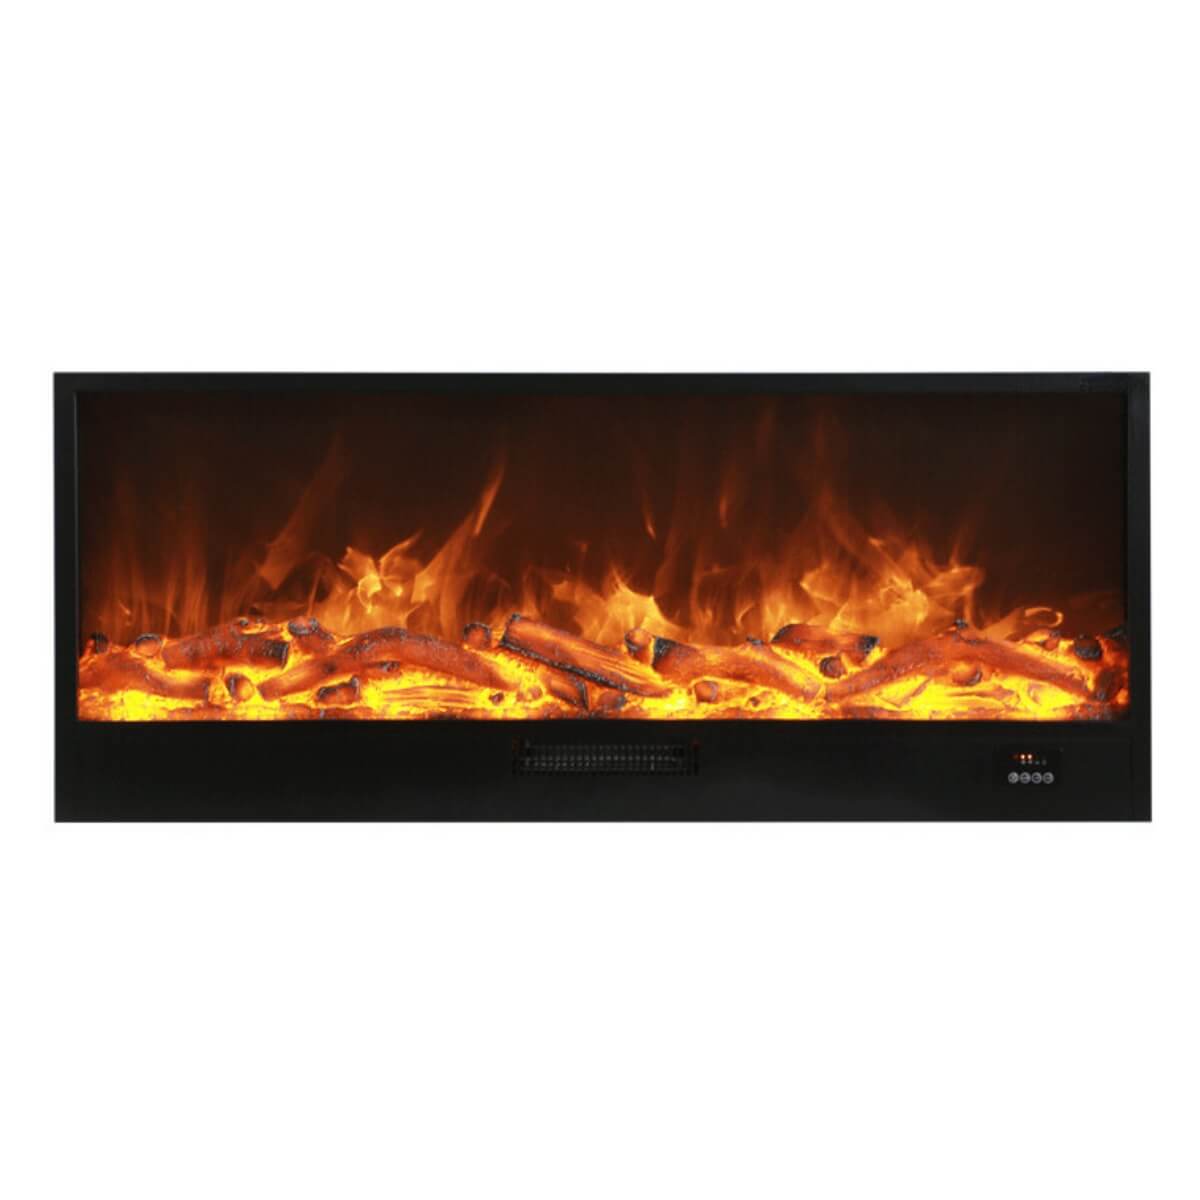 Eclipse Home - Wall Insert Fireplace Traditional Orange Flames 3 Dimming Adjust Black Frame 1500mm (Custom made)